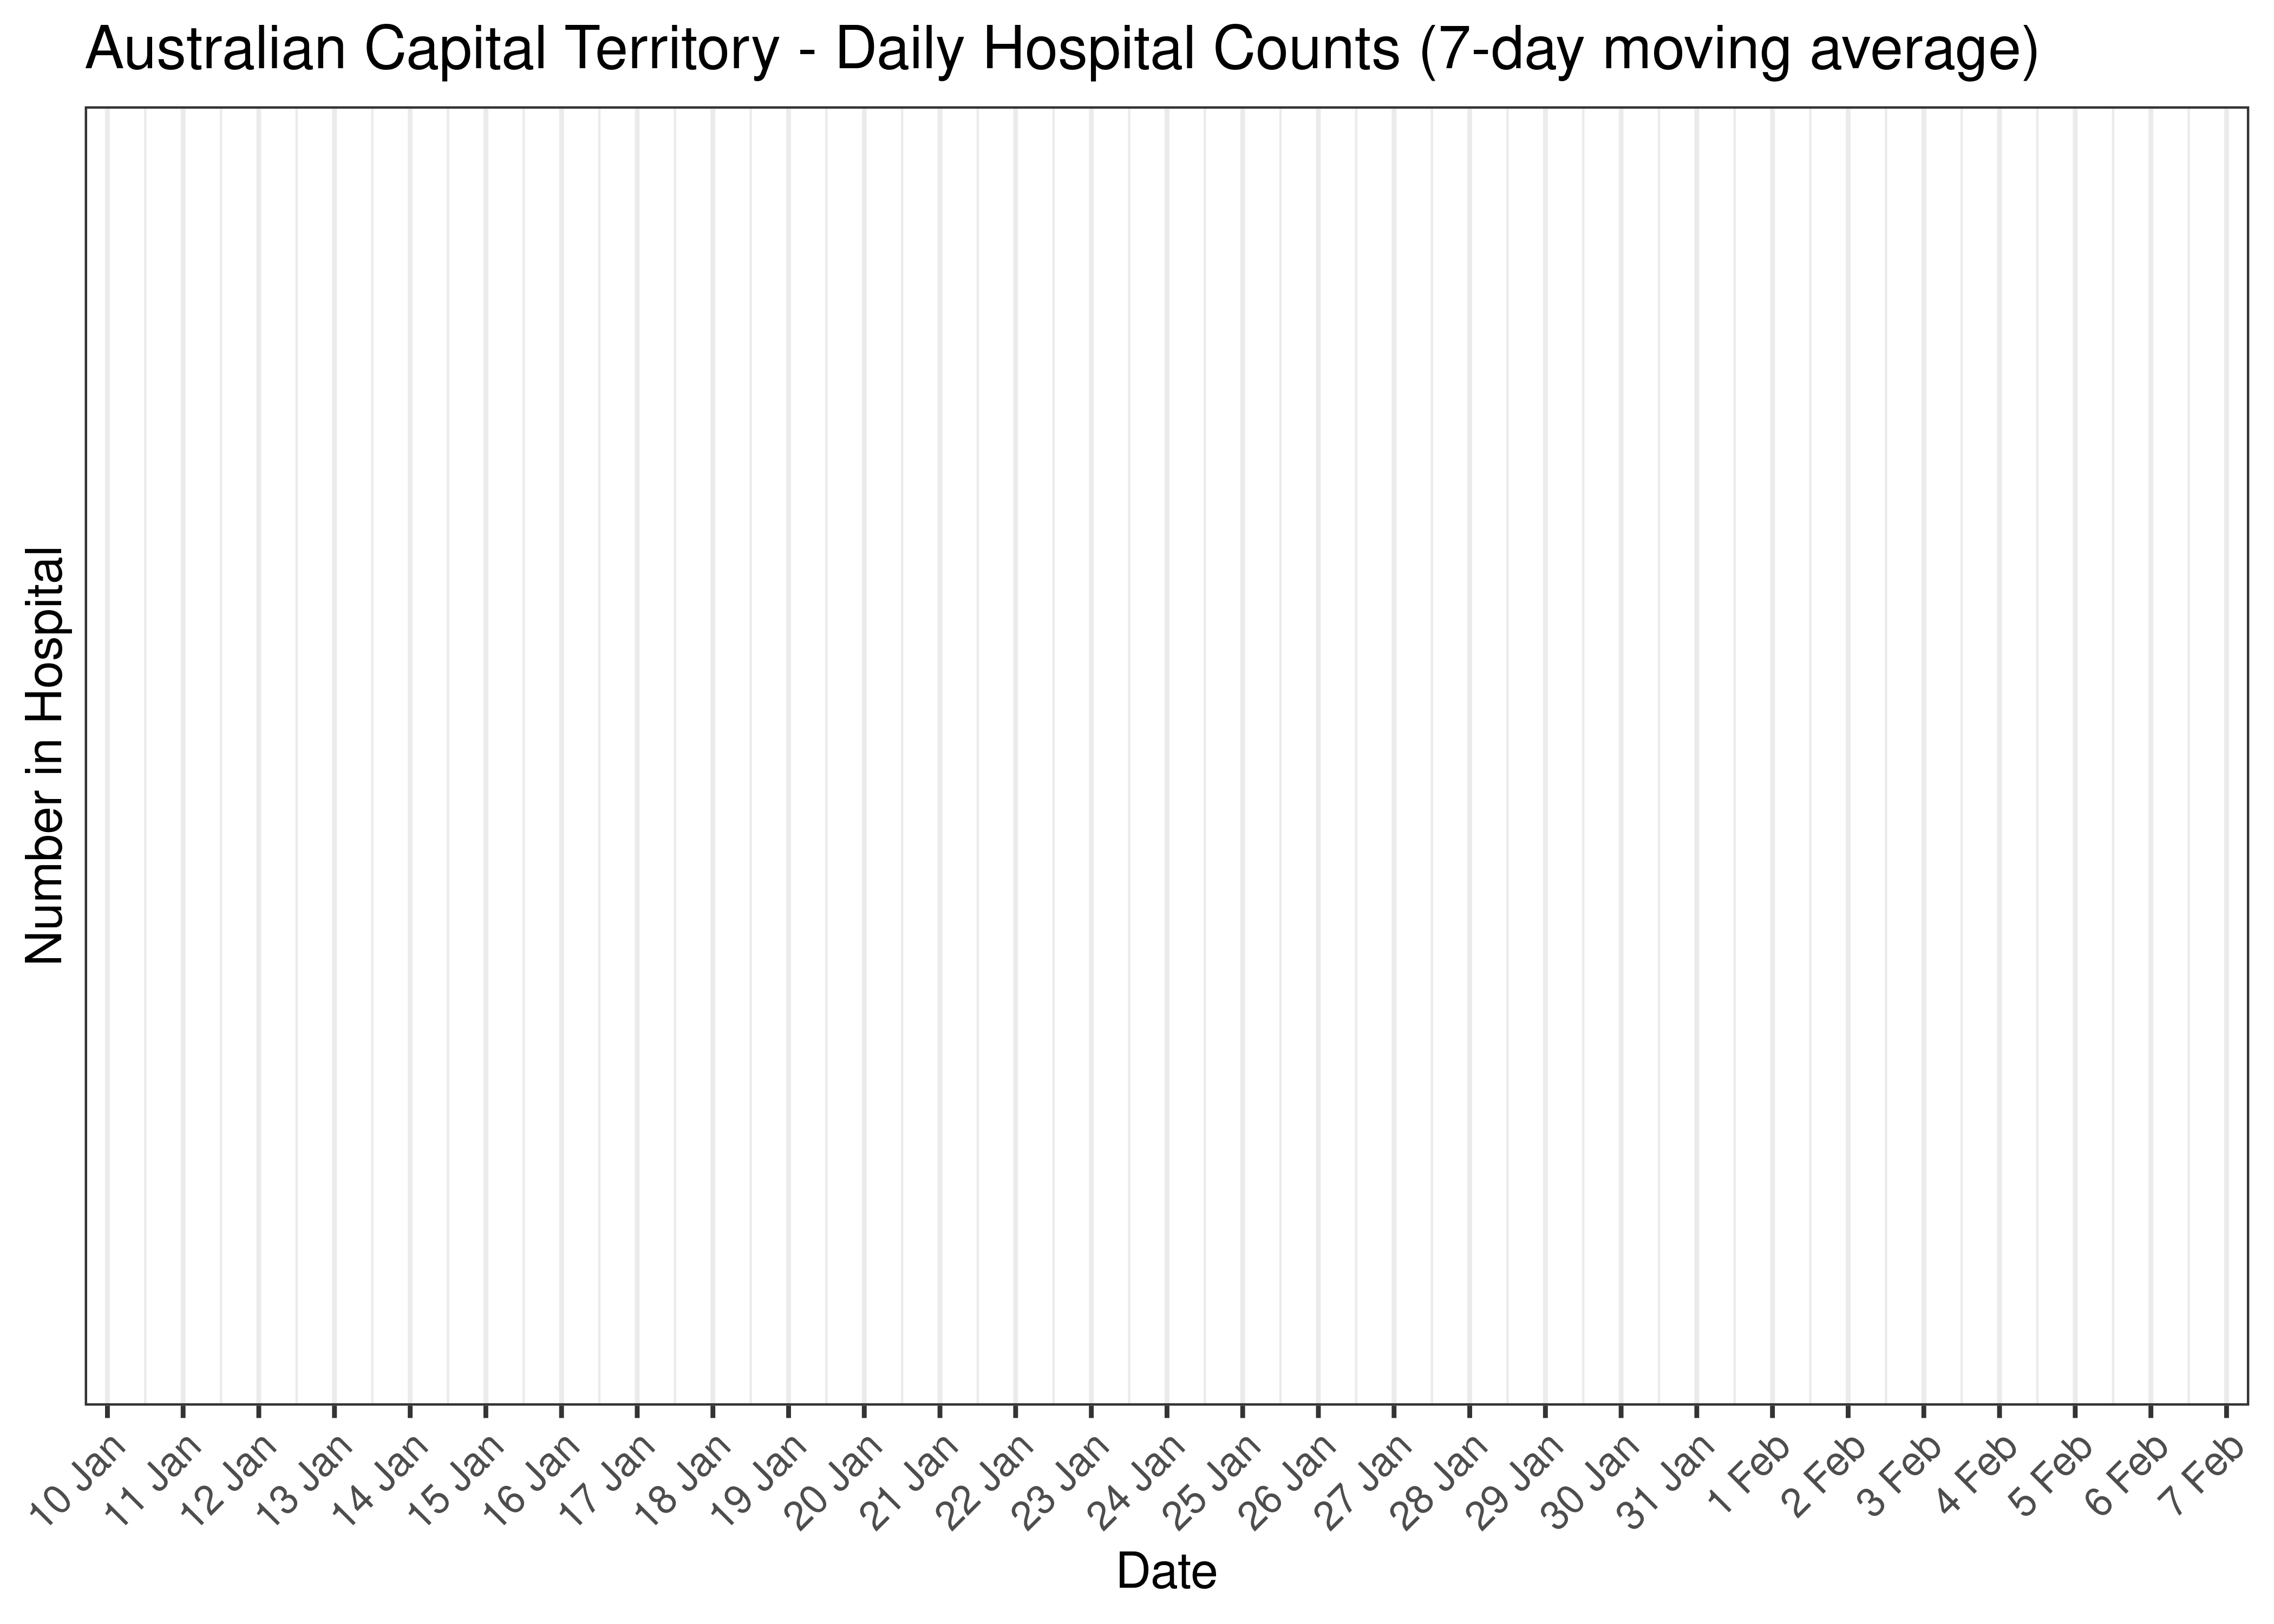 Australian Capital Territory - Daily Hospital Counts for Last 30-days (7-day moving average)